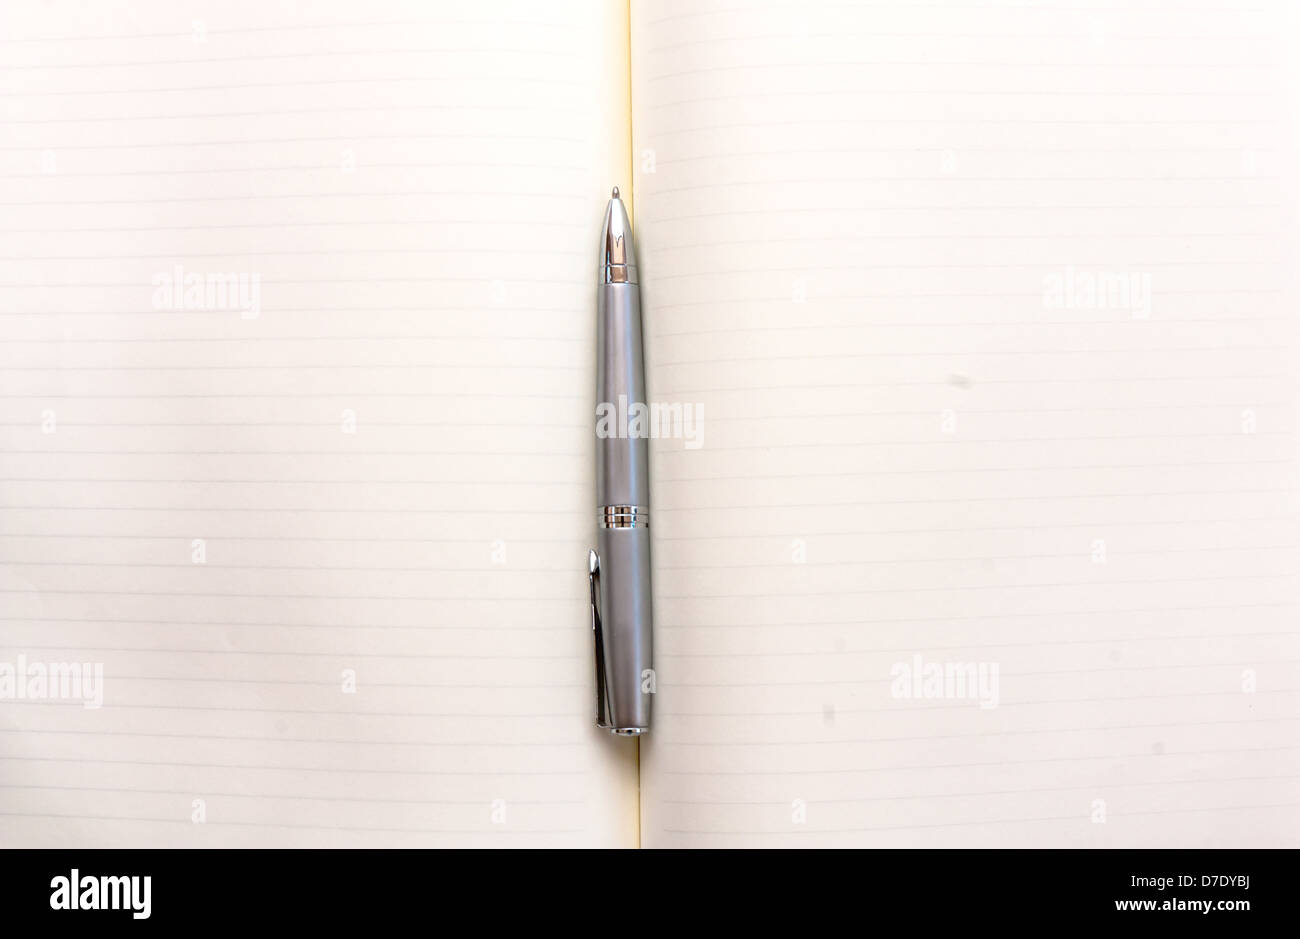 Opened notebook with blank pages and a pen Stock Photo